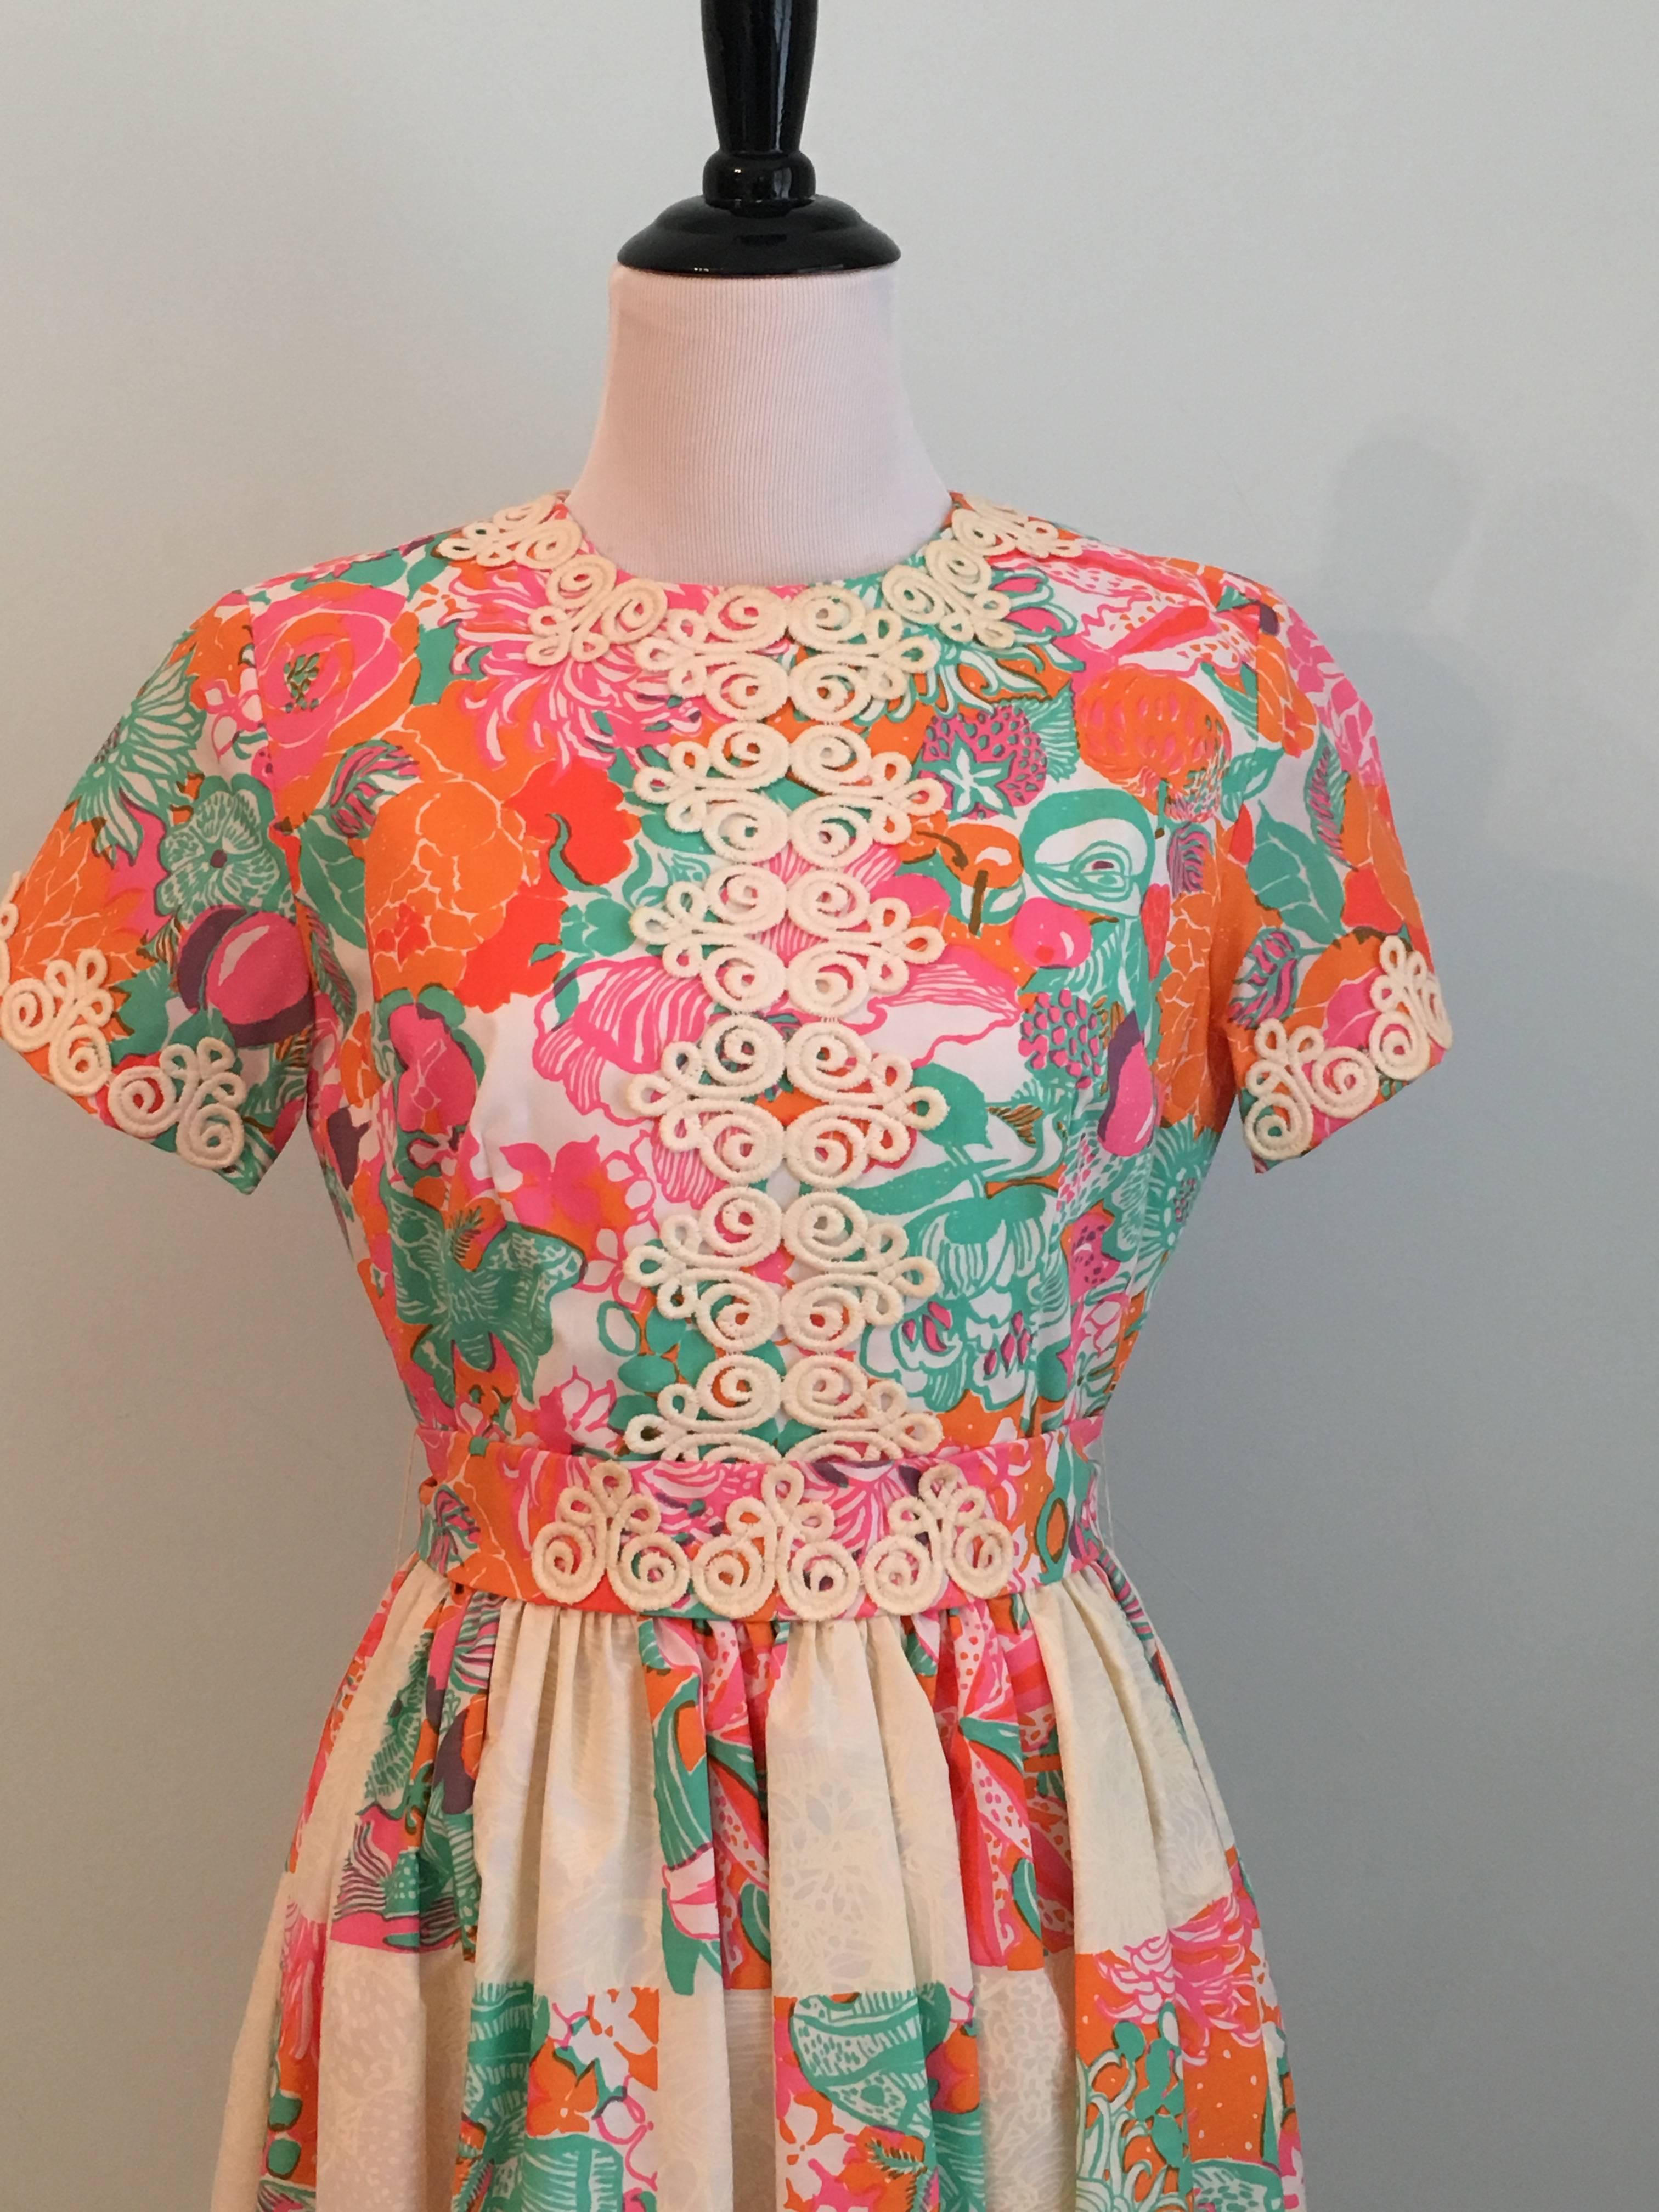 Women's 1960s Lilly Pulitzer Maxi Dress with Patchwork Print Skirt For Sale